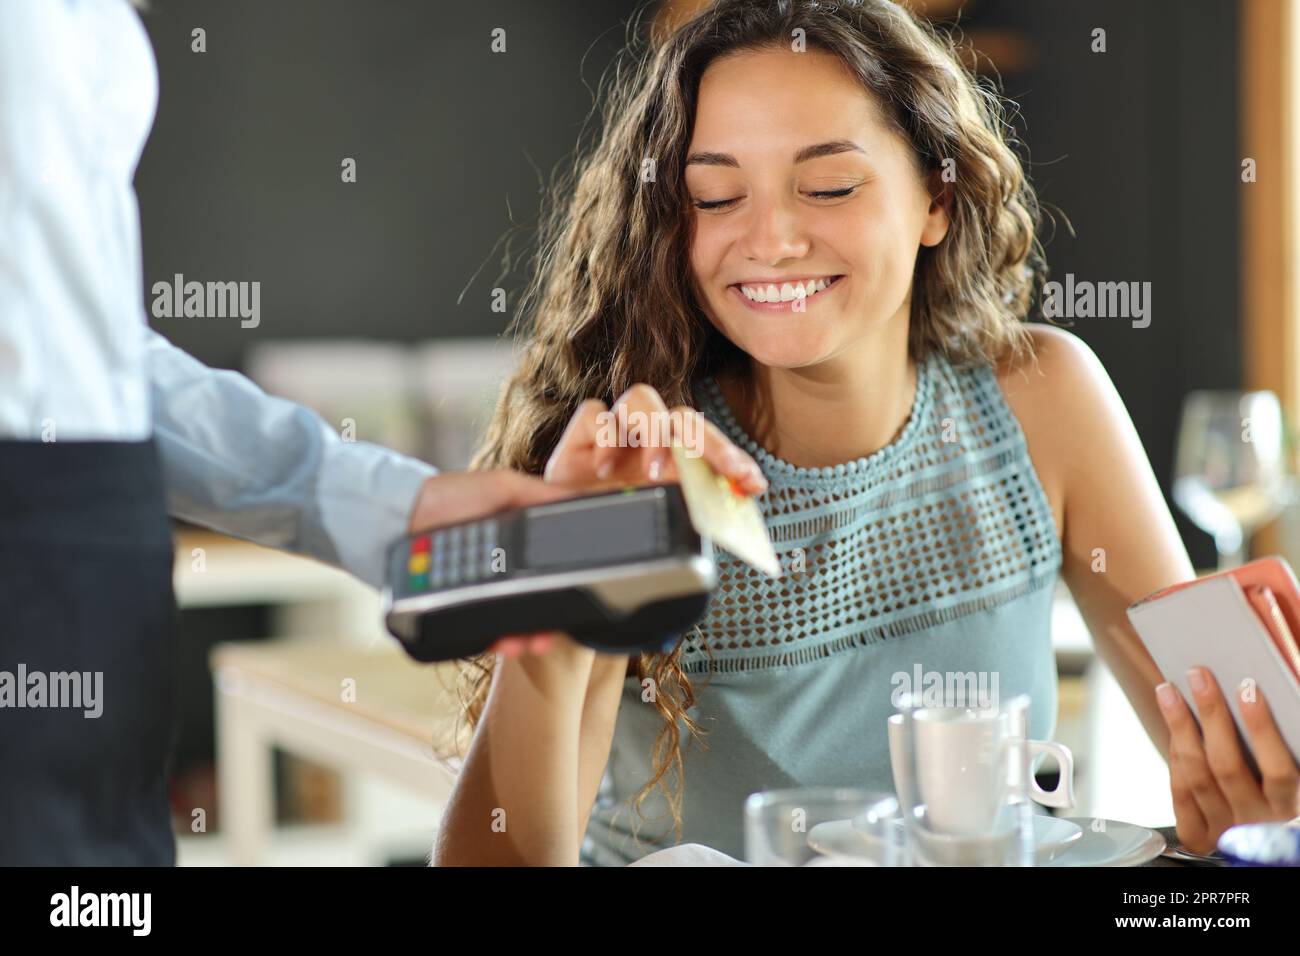 Happy woman paying in a restaurant with credit card Stock Photo